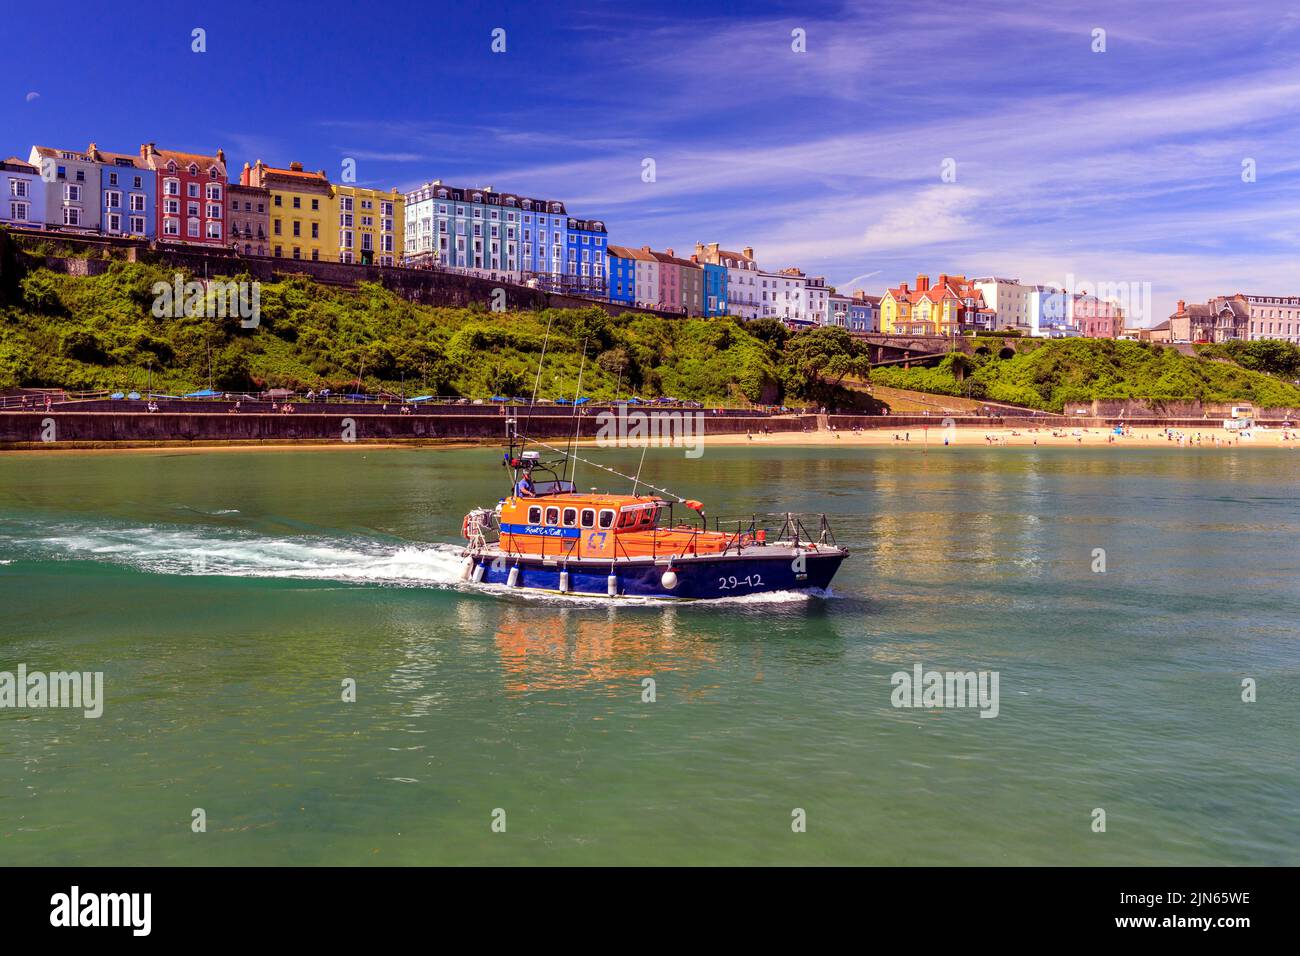 A decommissioned lifeboat drifts across the picturesque sheltered harbour, overlooked by rows of colourful houses in Tenby, Pembrokeshire, Wales, UK Stock Photo